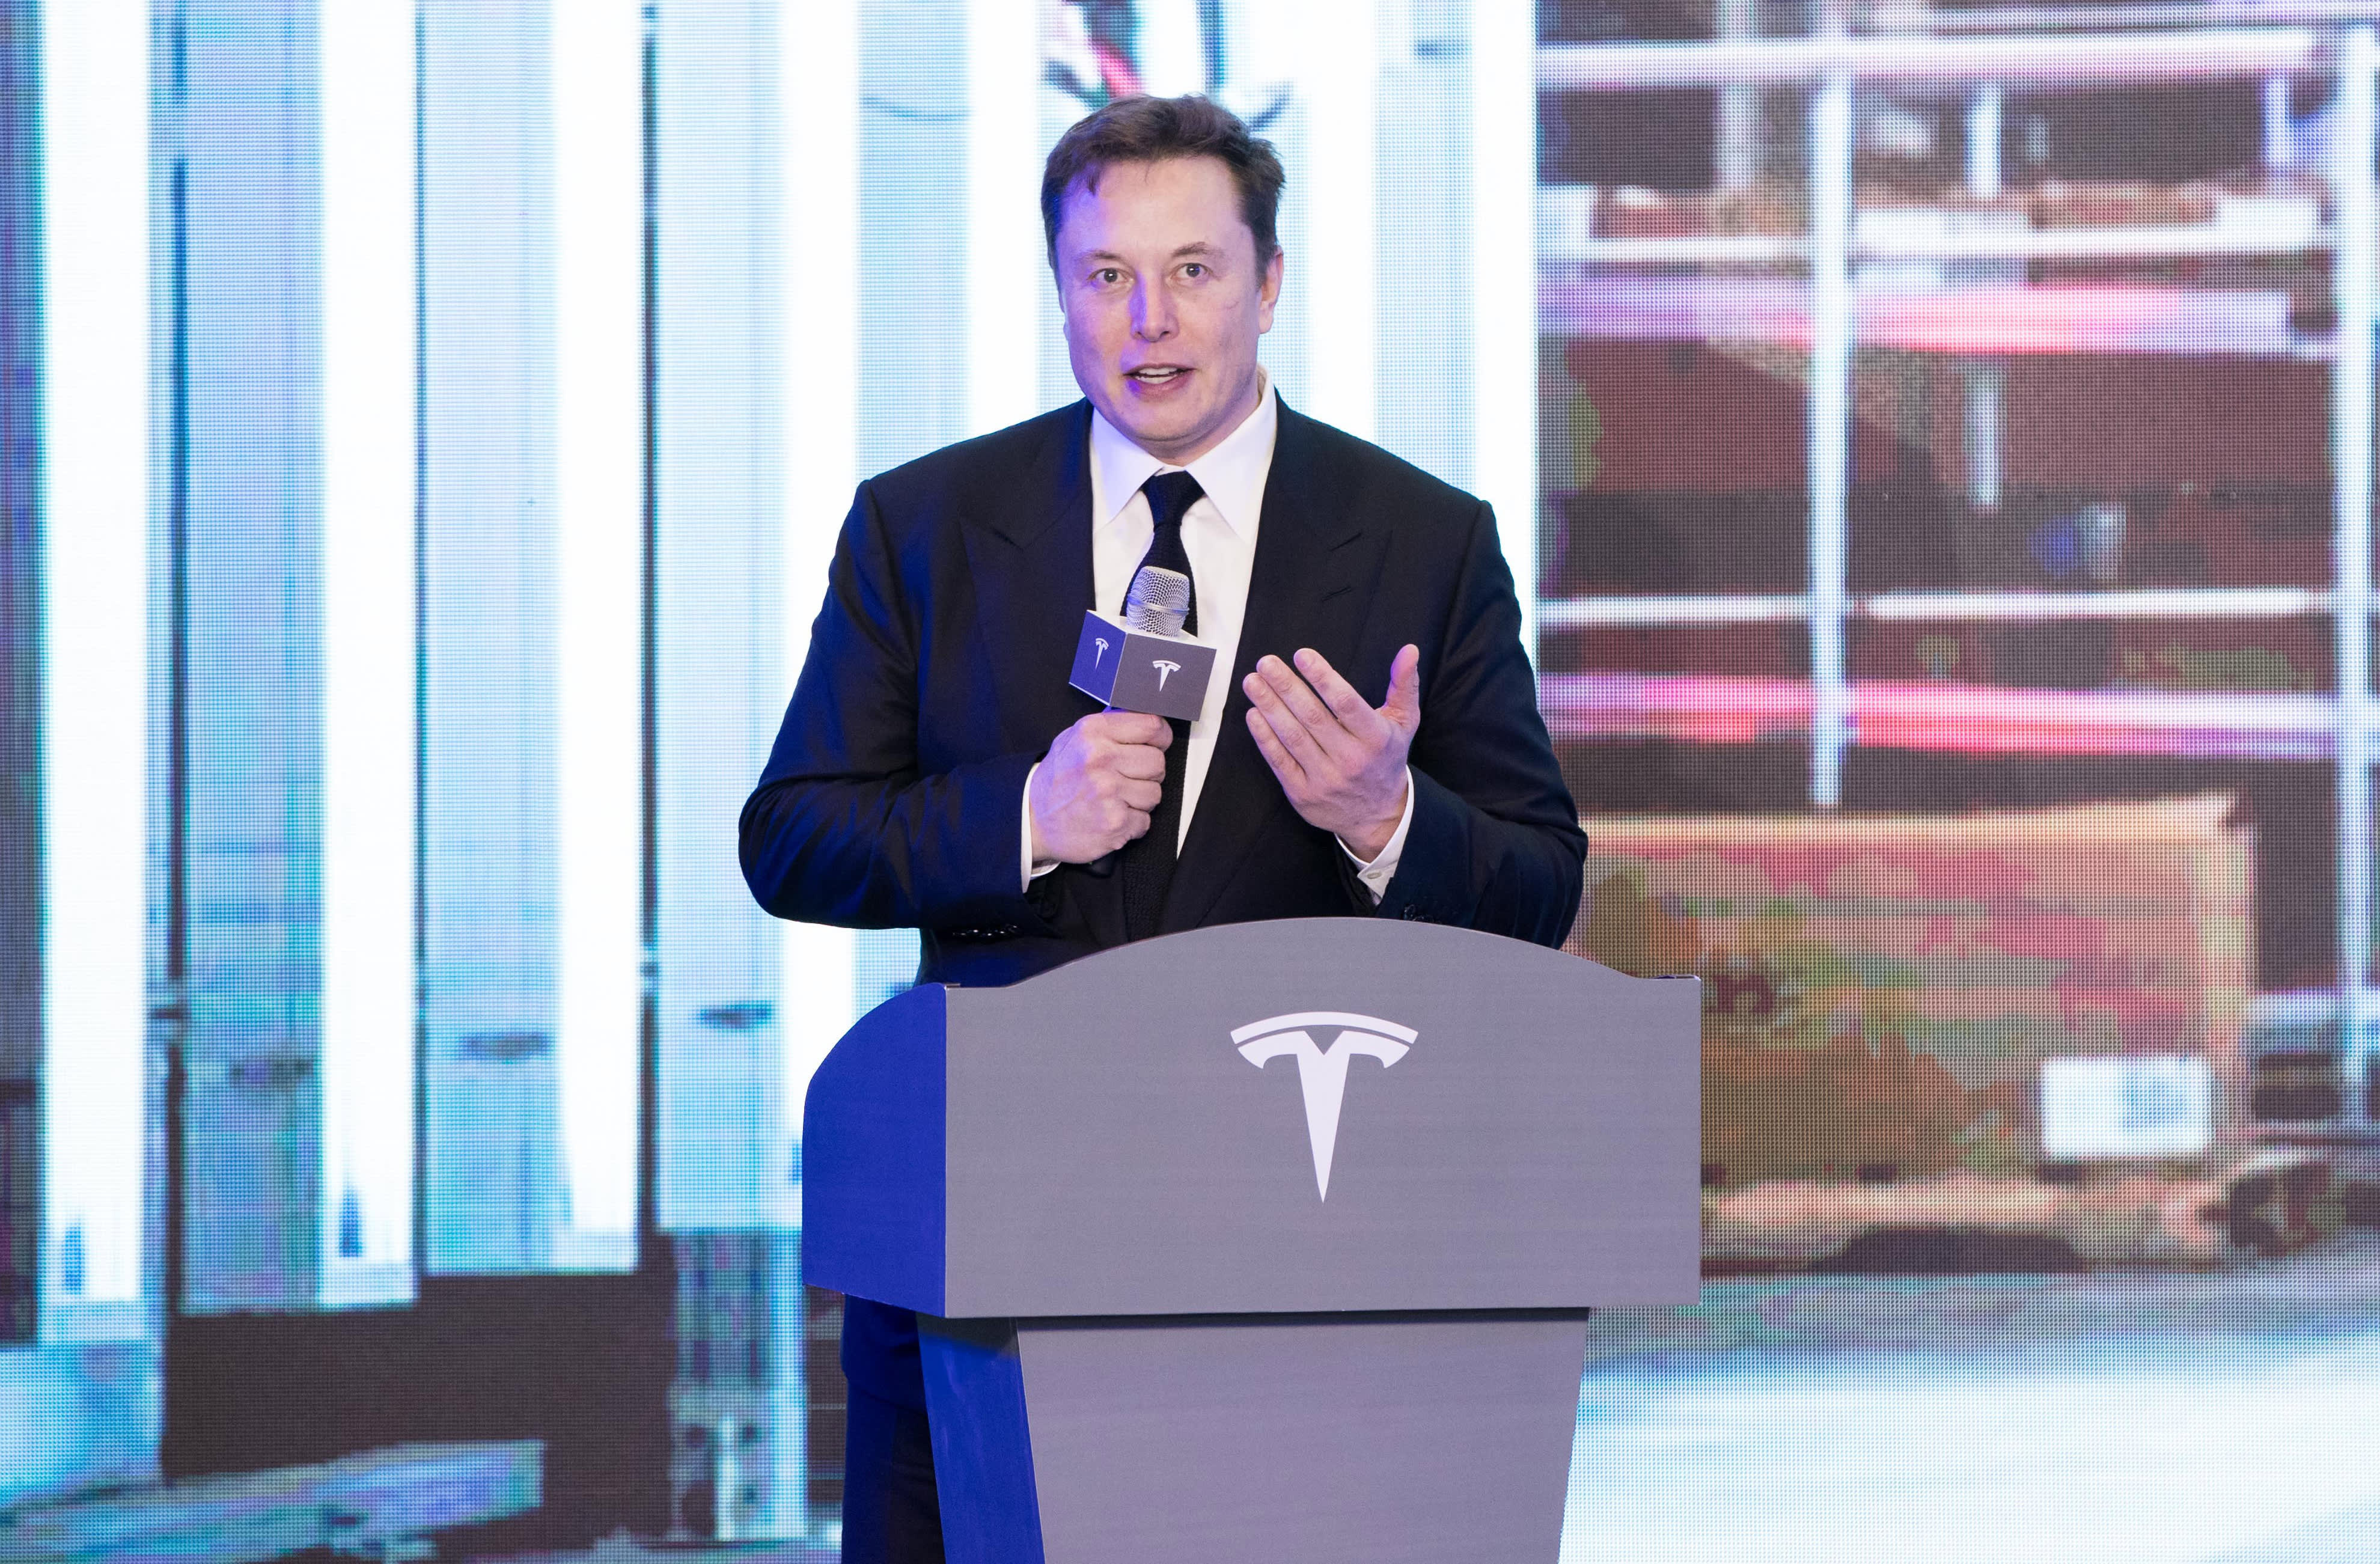 Tesla hikes car prices in the U.S., China after Musk inflation warning